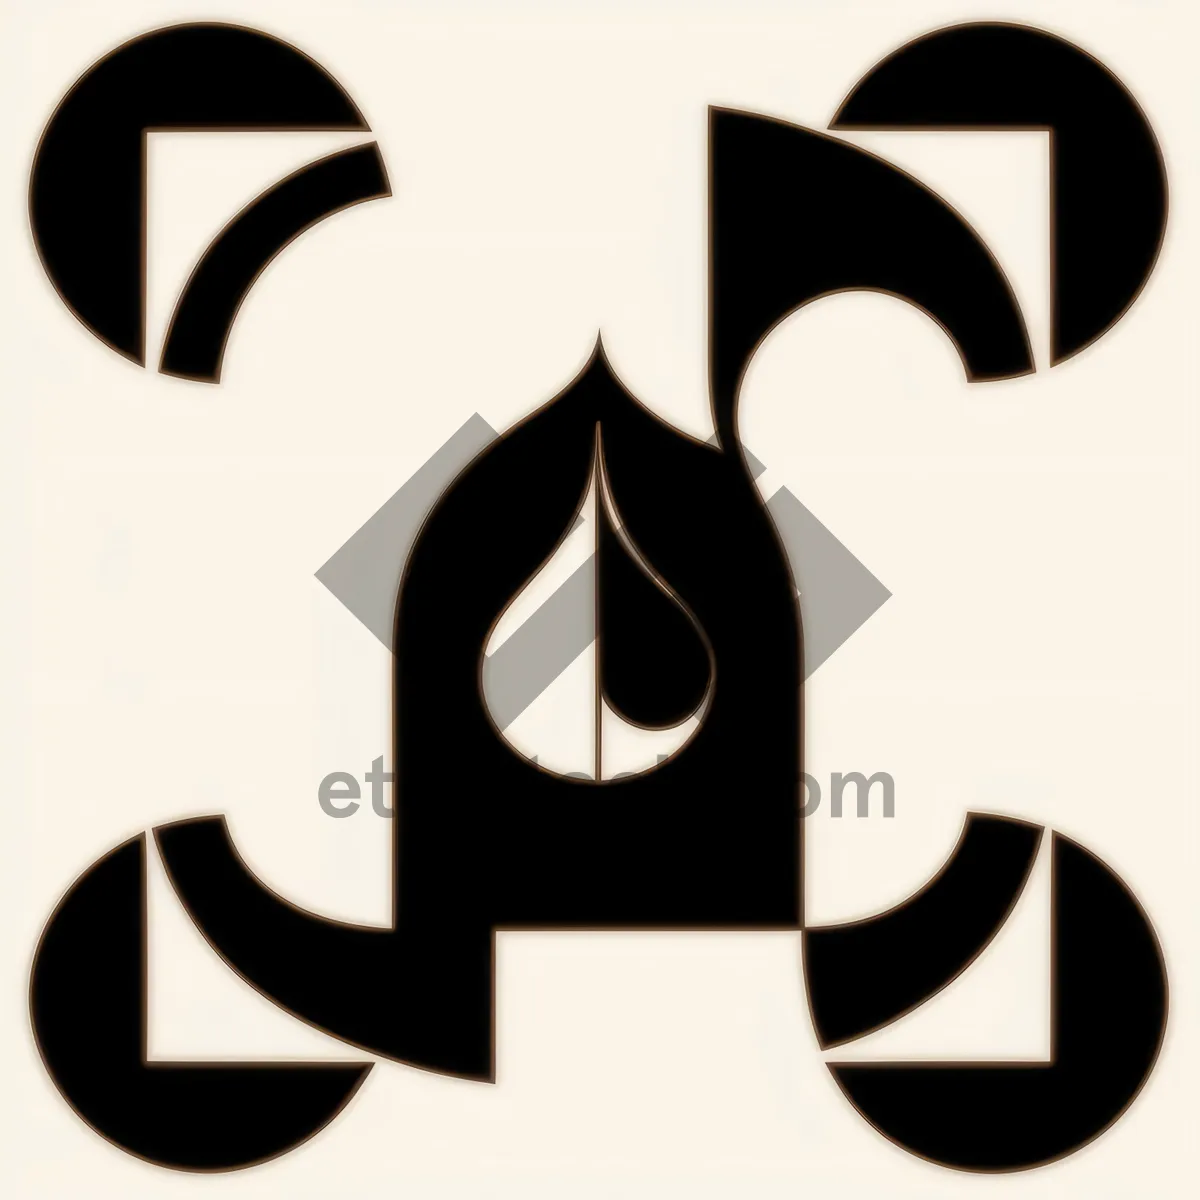 Picture of Black Pirate Cartoon Clover Symbol - Iconic Silhouette Art